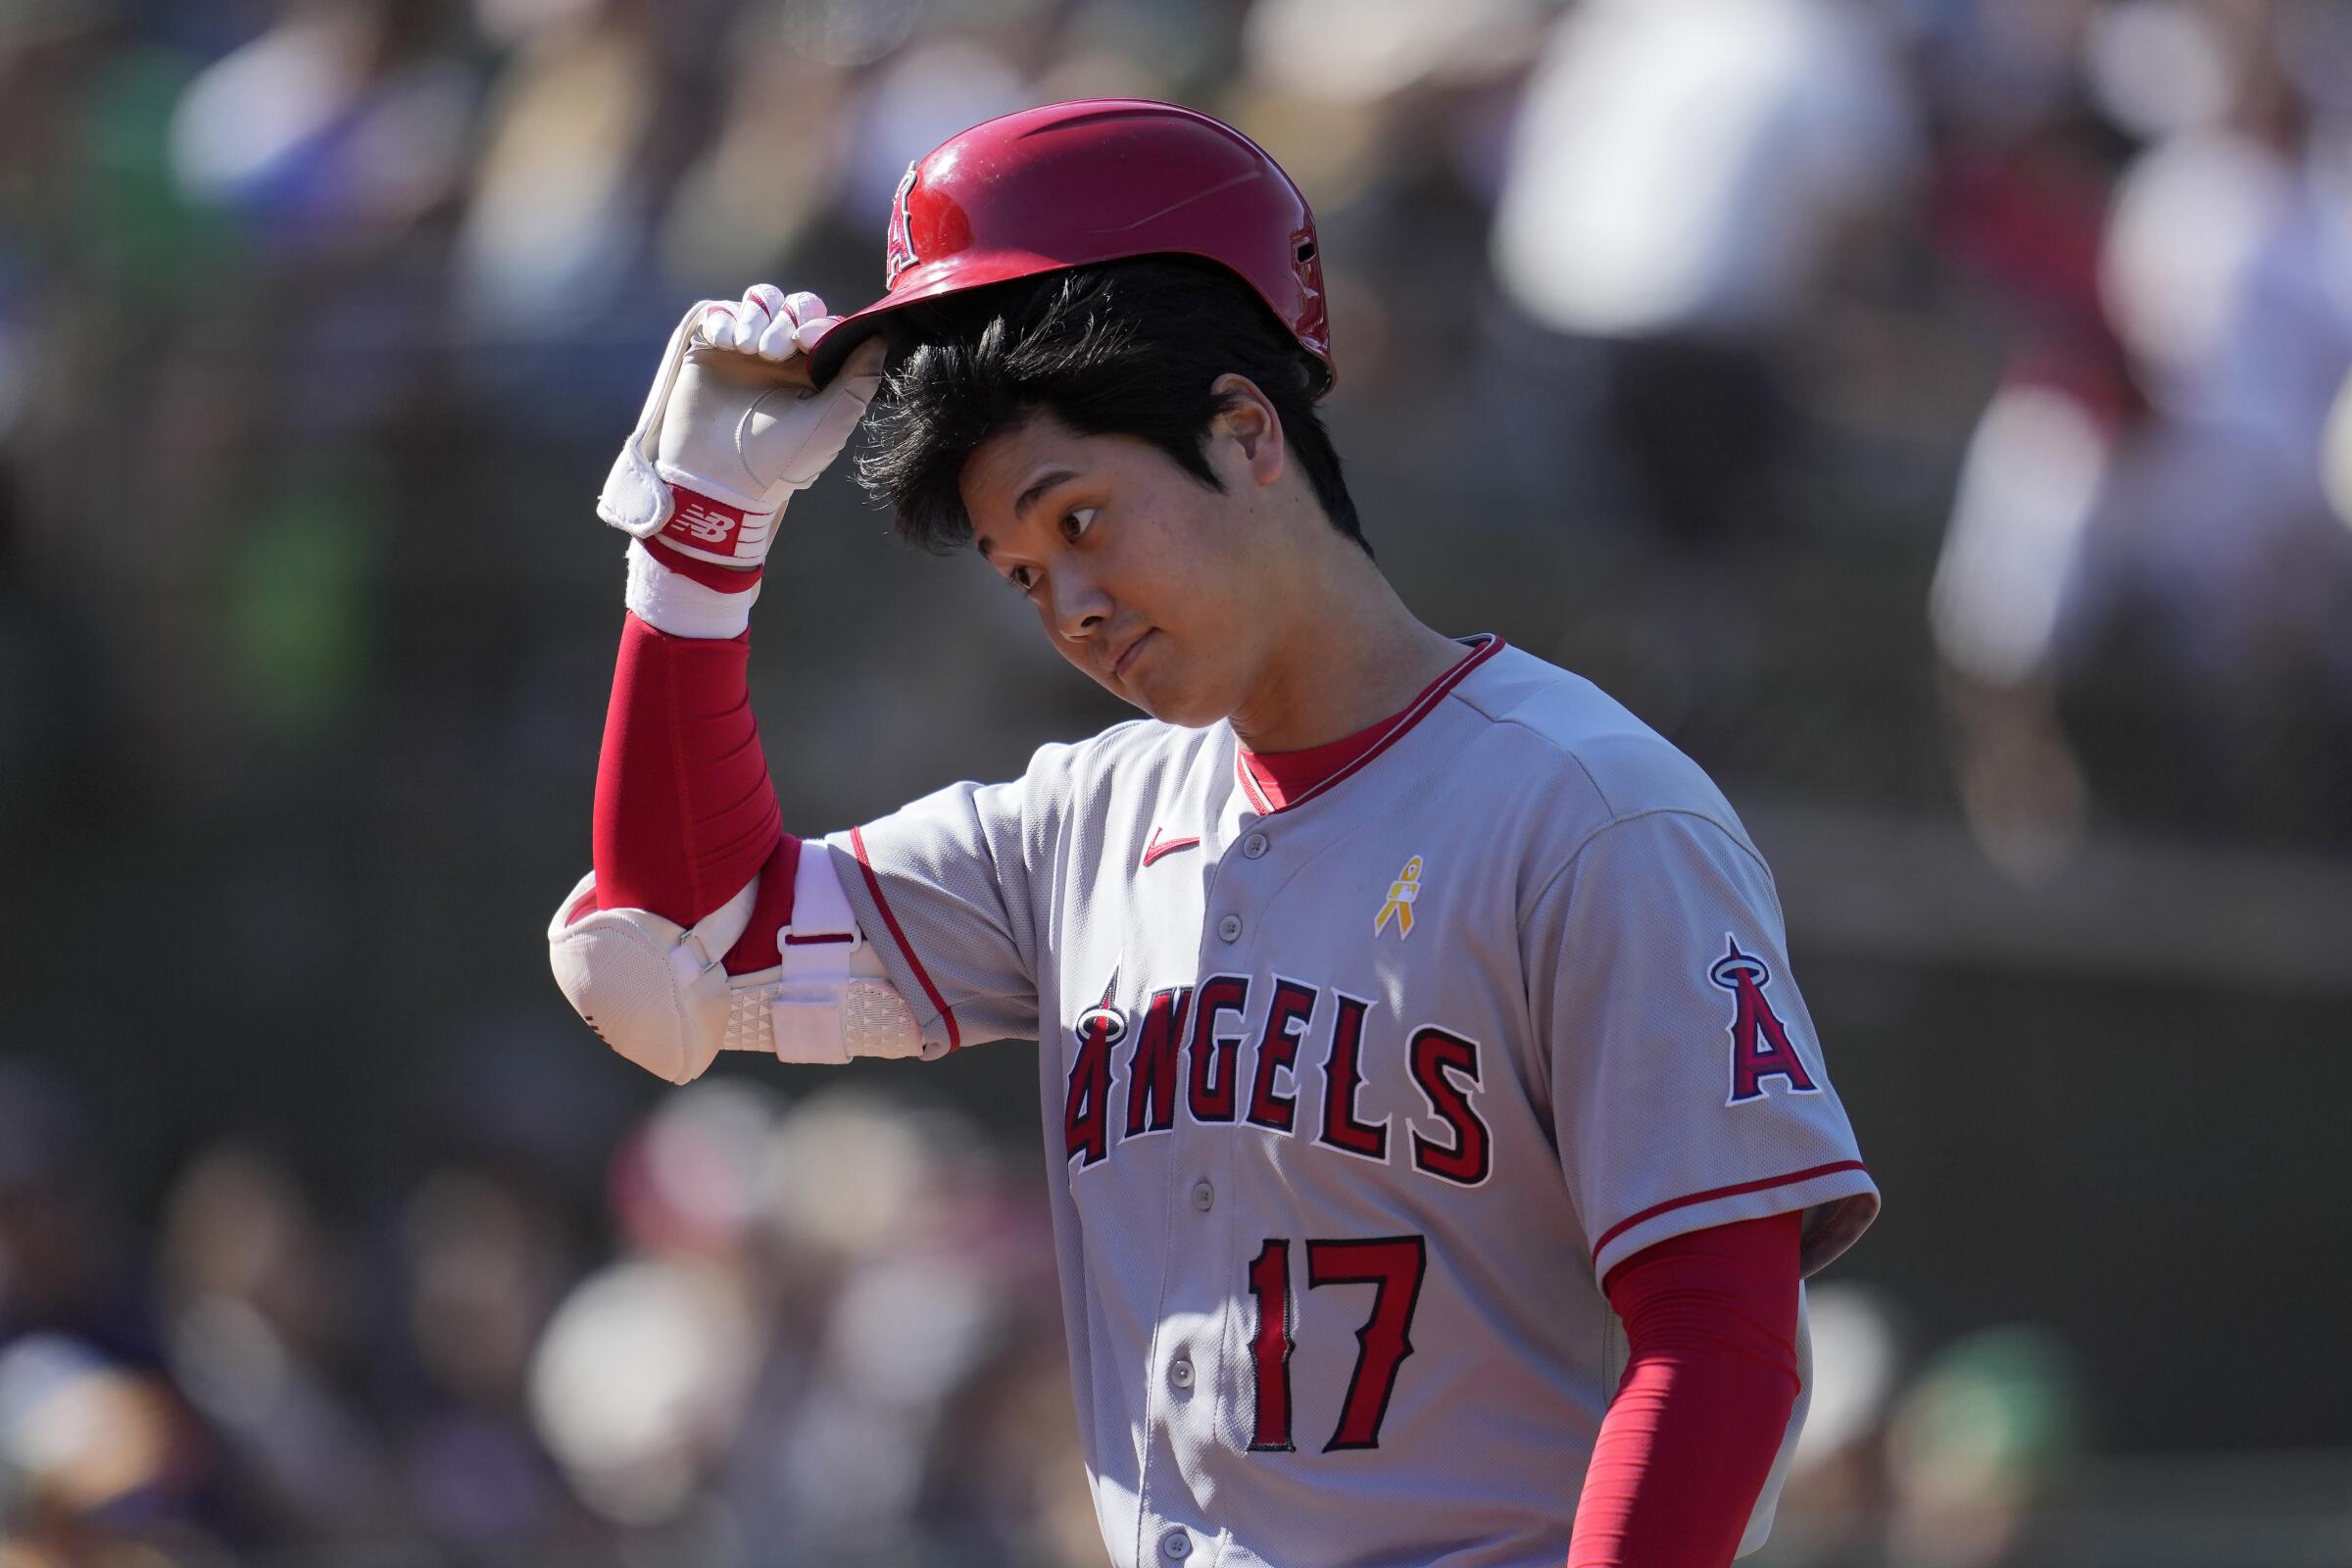 After six years together, Angels move on from Ohtani's departure for Dodgers